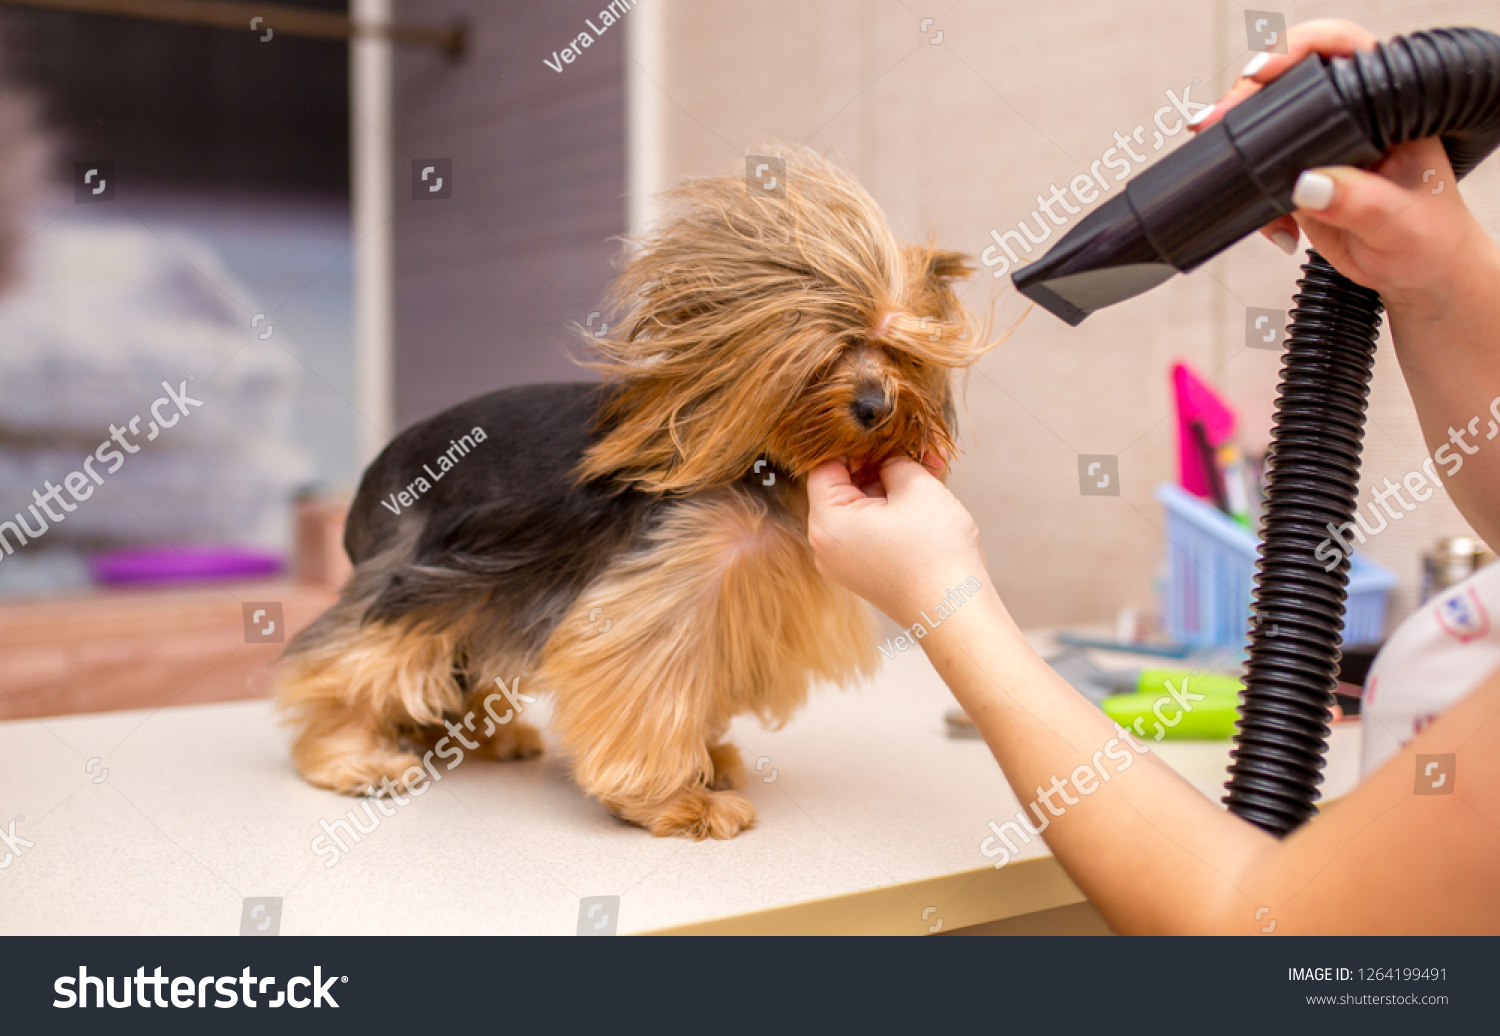 Grooming animals, grooming, drying and styling dogs, combing wool. Grooming master cuts and shaves, cares for a dog. Beautiful Yorkshire Terrier. #1264199491